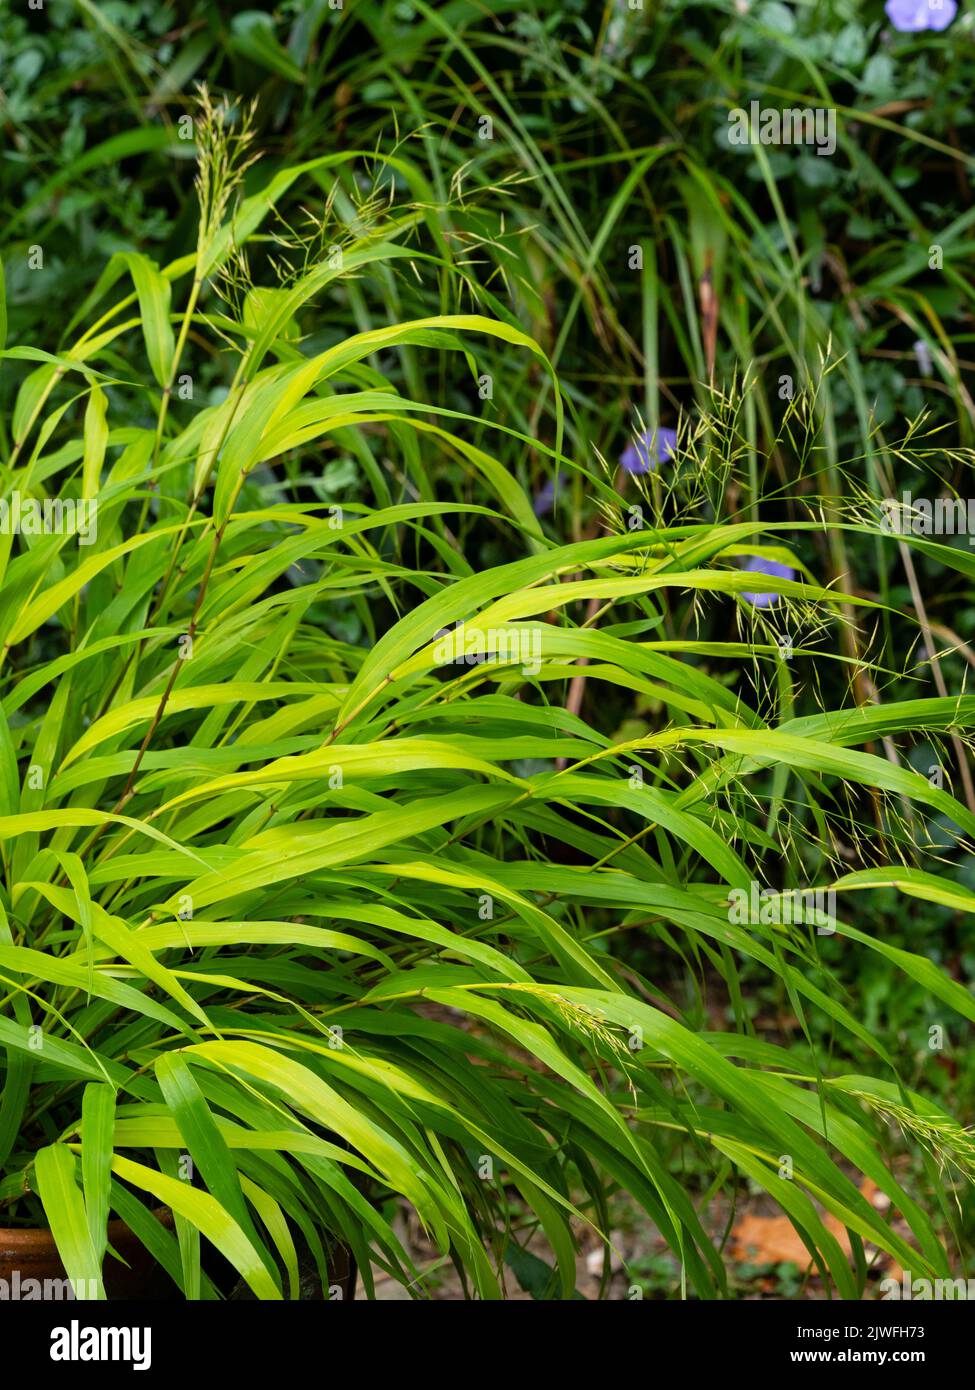 Gold tinged leaves ofthe hardy perennial Japanese forest grass, Hakonechloa macra 'Sunflare' Stock Photo